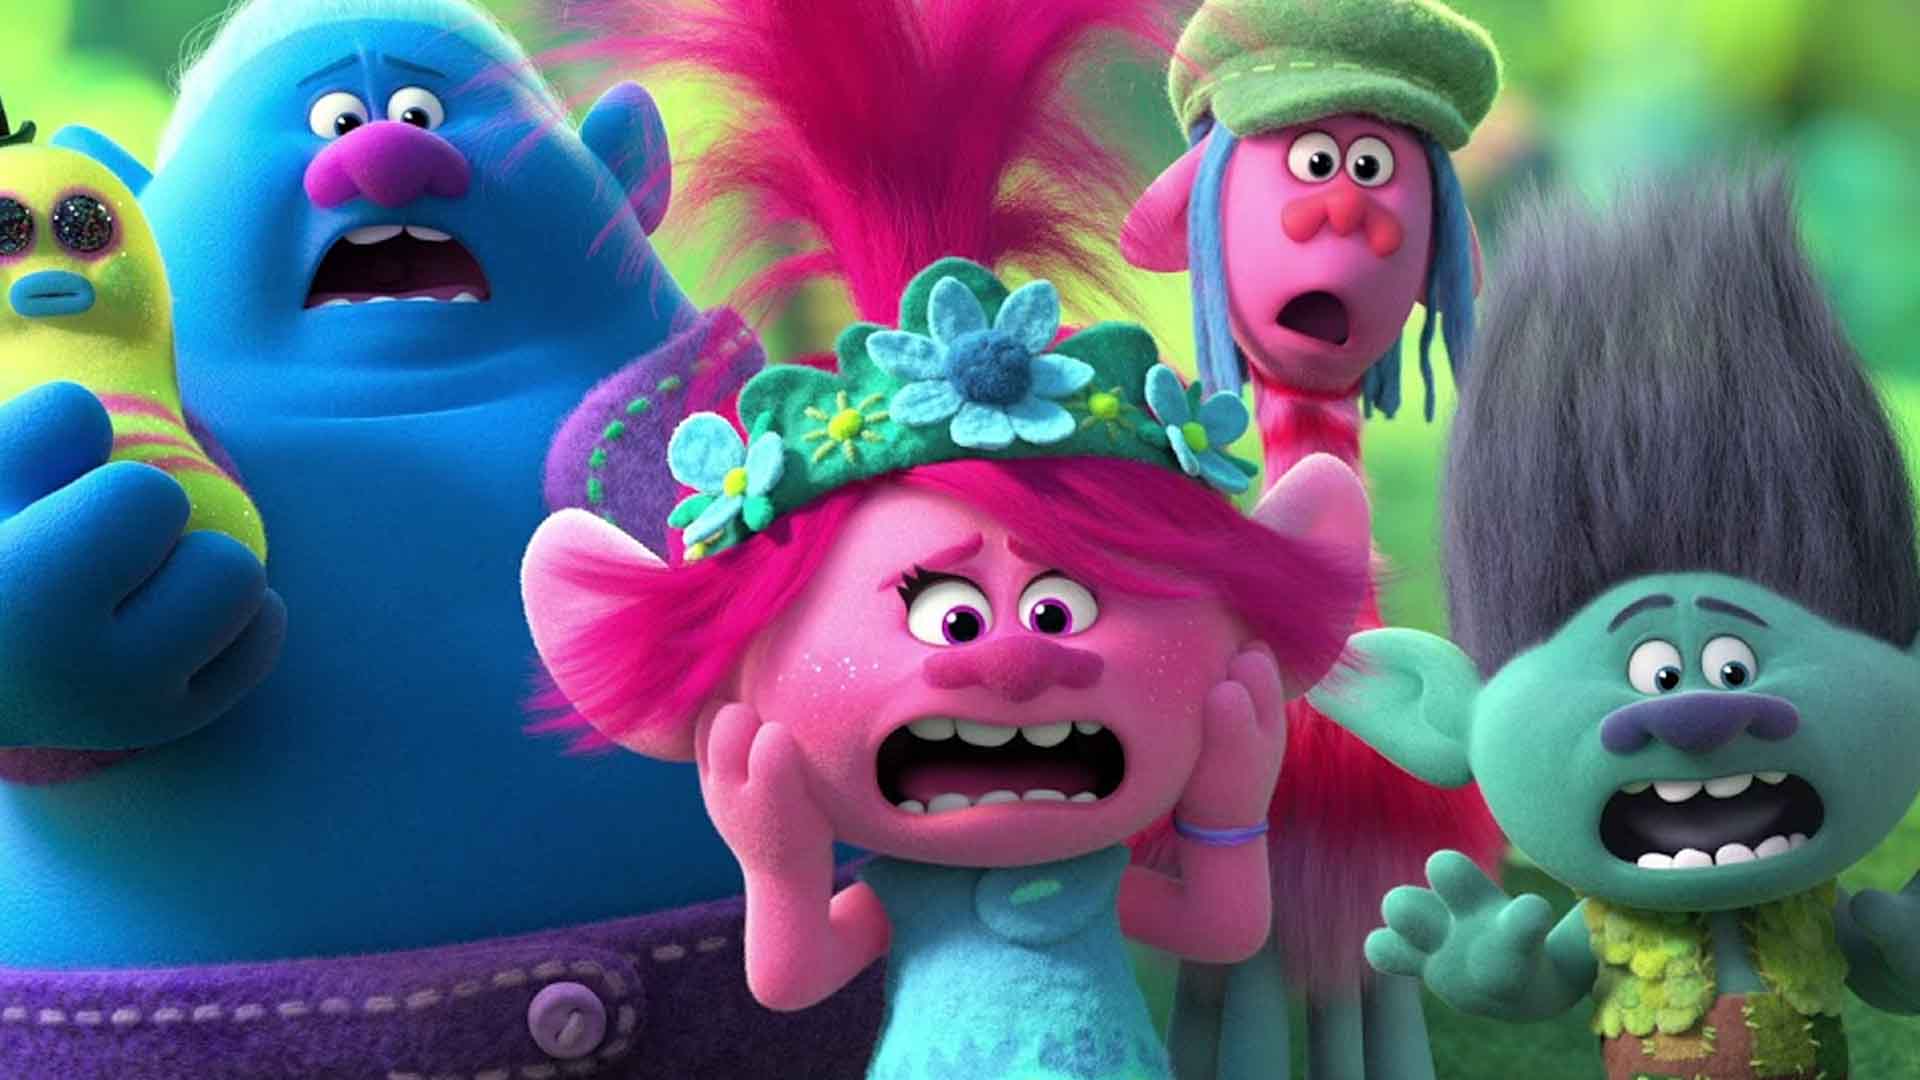 Battle For Music Begins With The “Trolls World Tour”